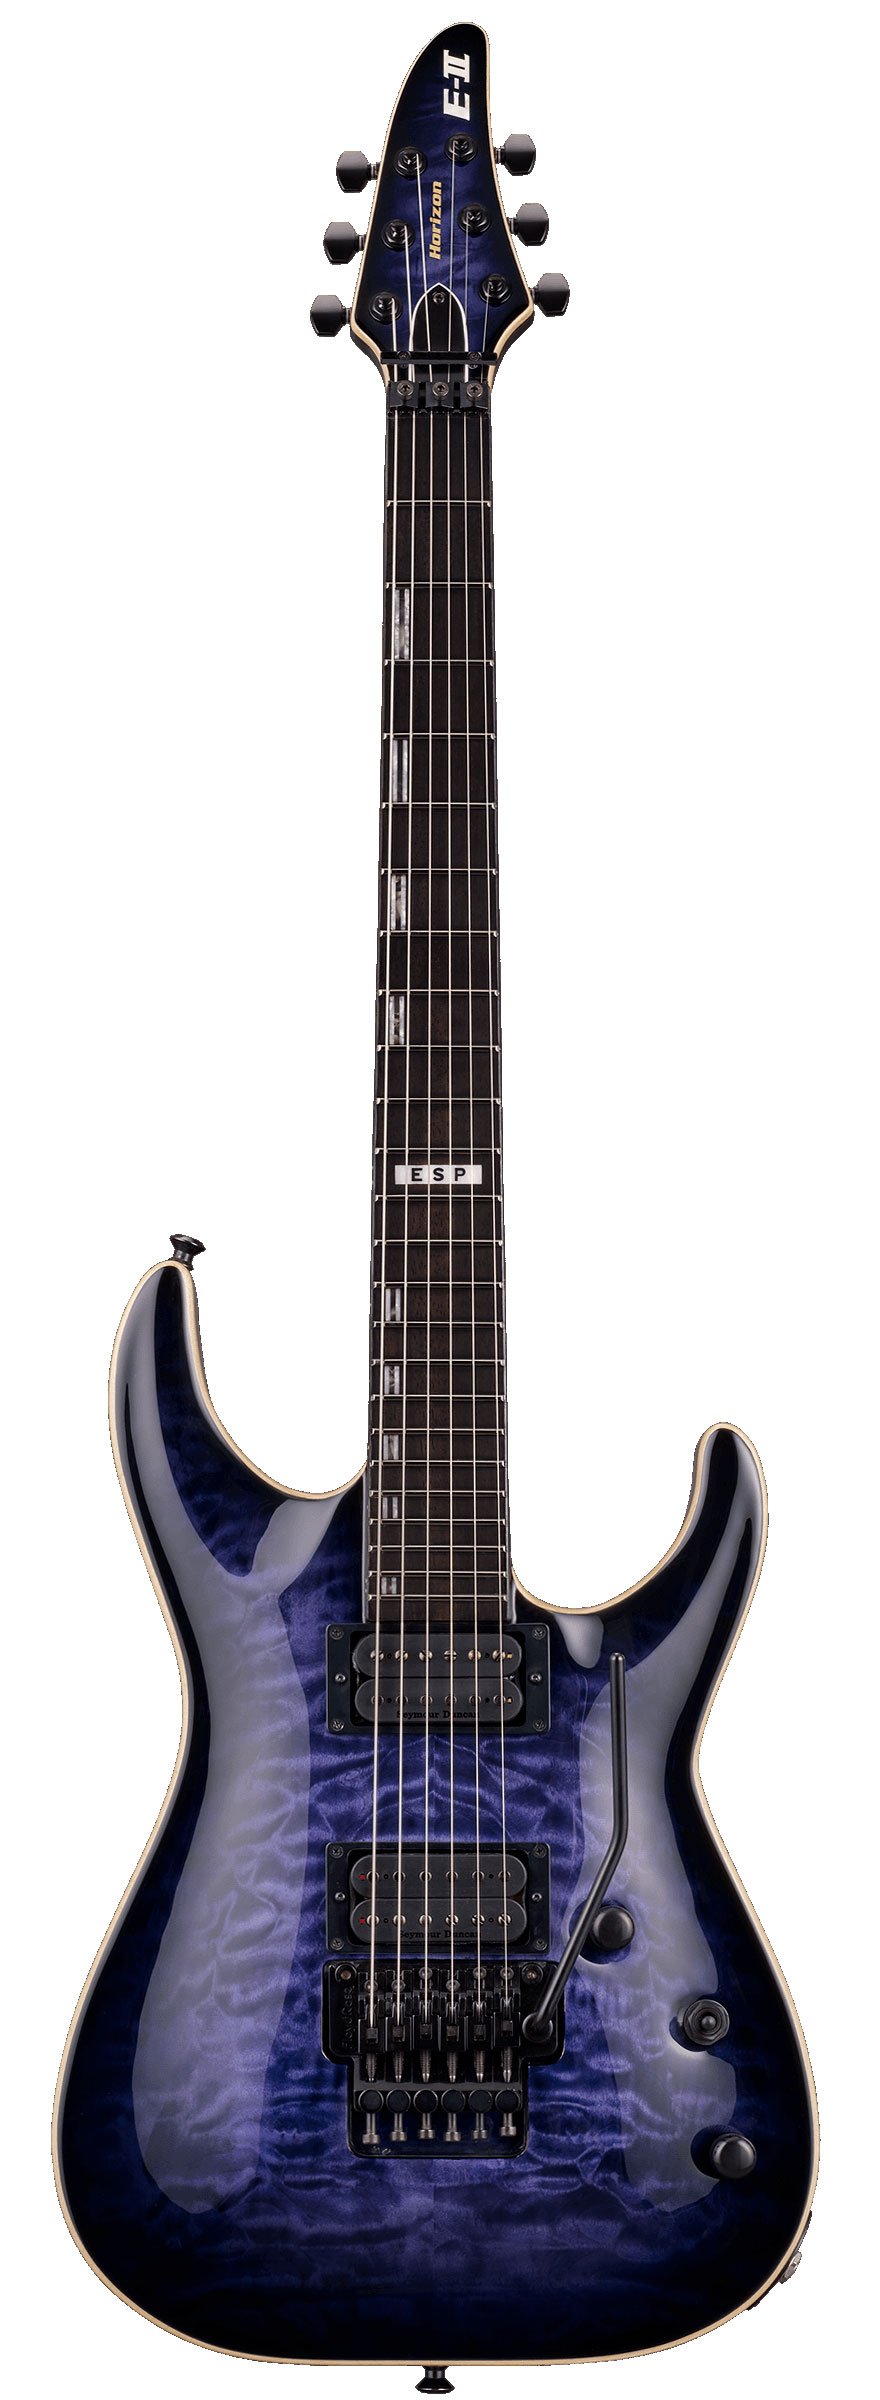 Specification Construction:Set-Thru-Neck Scale:25.5" Body:Mahogany Top:Quilted Maple Neck:Maple Fingerboard:Ebony Fingerboard Radius:305mm Finish:Reindeer Blue Nut Width:42mm Nut Type:Locking Neck Contour:Thin U Frets/Type:24 XJ Hardware Color:Black Strap Button:Schaller Security Lock Tuners:Gotoh Bridge:Floyd Rose Original Neck Pick UP Seymour Duncan SENTIENT Bridge Pick Up Seymour Duncan PEGASUS Electronics:Passive Electronics Layout:Vol/Tone(P/P)/Toggle Switch Case:CMHFF Case Included:Y 画像はサンプルです。 クロサワオンラインストアならではのポイント! ・メーカー正規保証書付き ・全ての楽器は検品した後に発送 ・こだわりの安心梱包 ・万が一の事故にも対応の保険付発送　